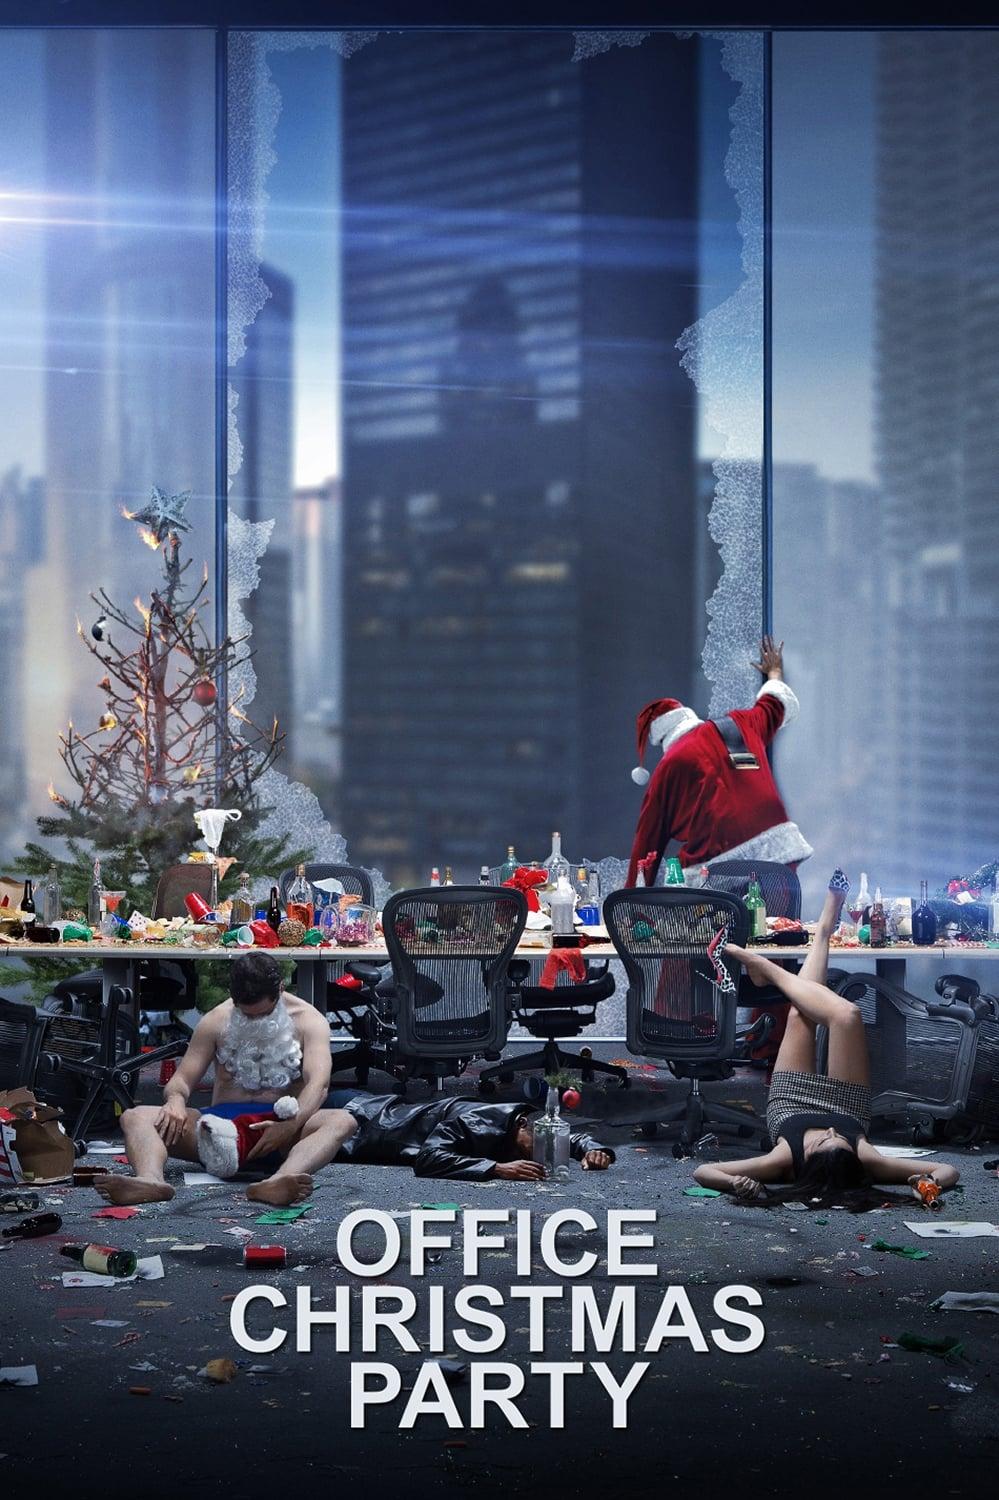 Office Christmas Party poster